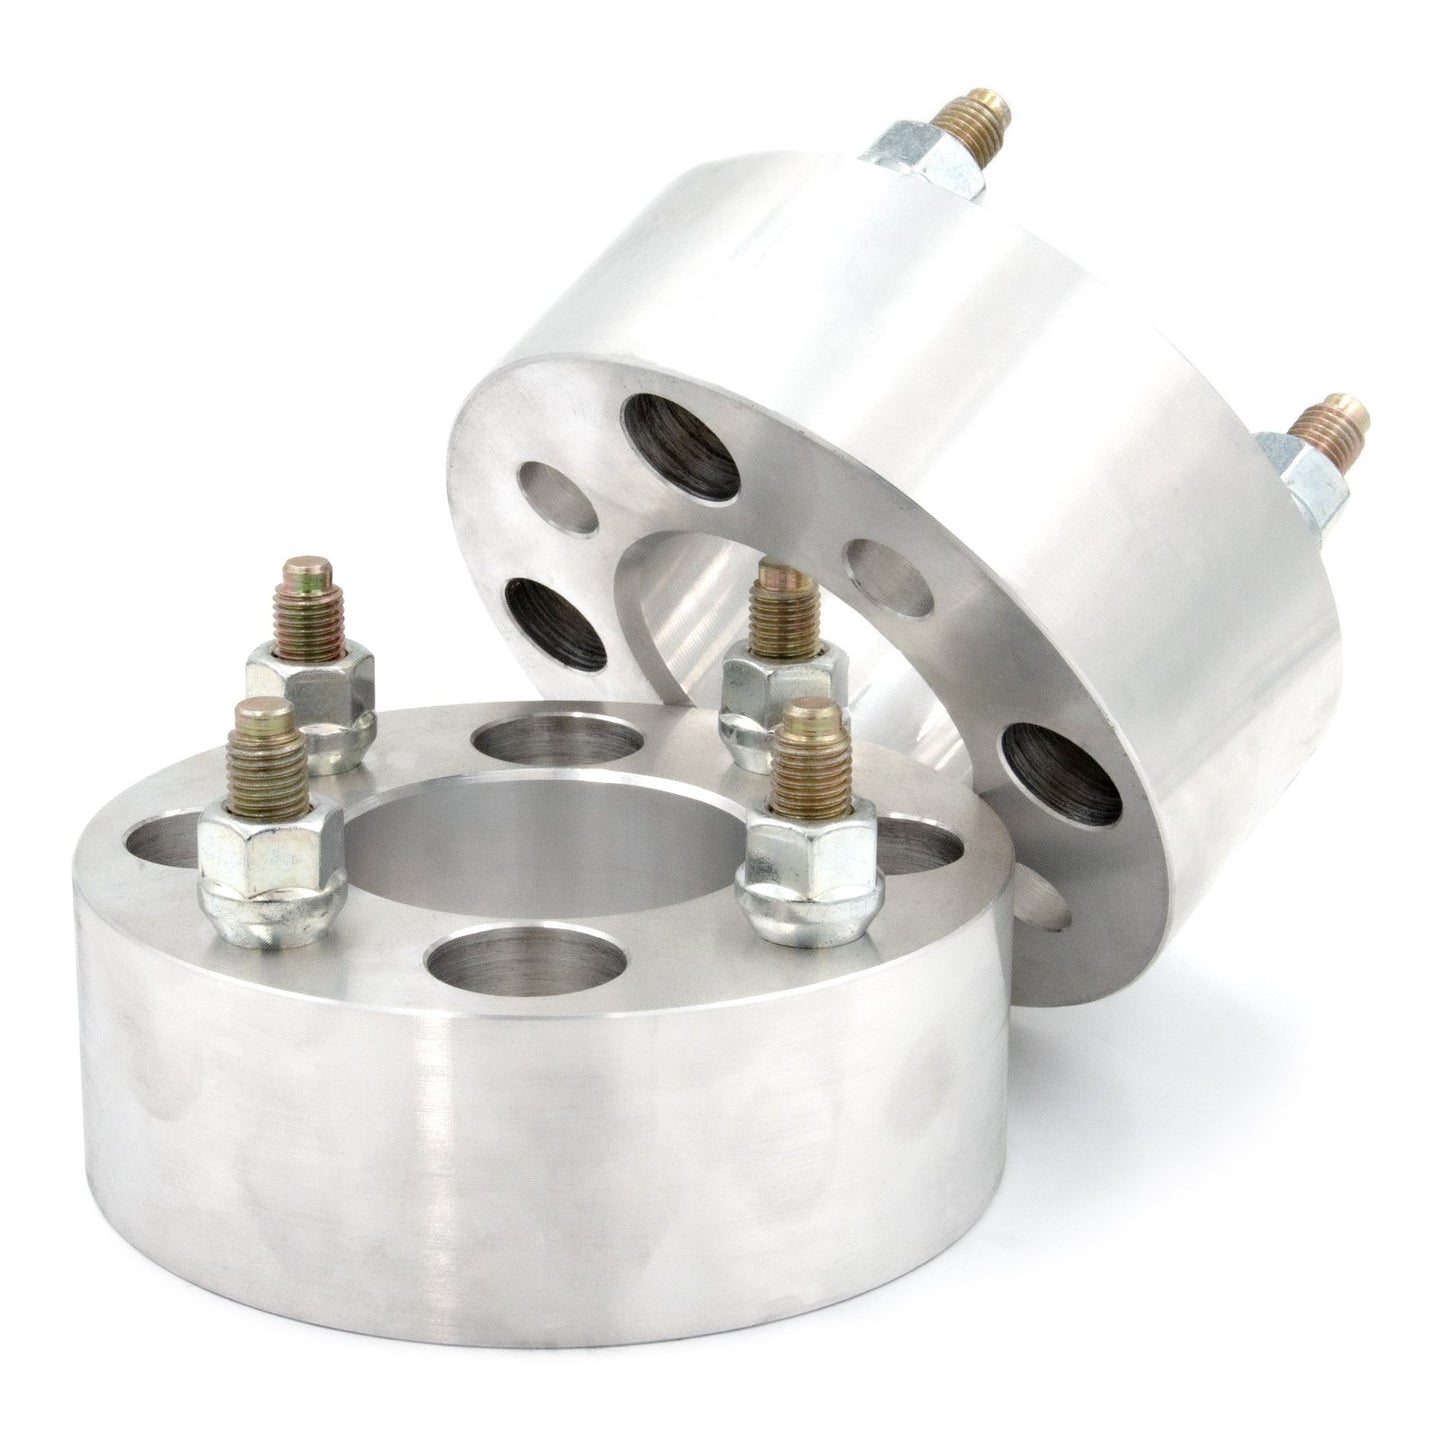 4x4" to 4x115 Wheel Spacer/Adapter - Thickness: 3/4"- 4"